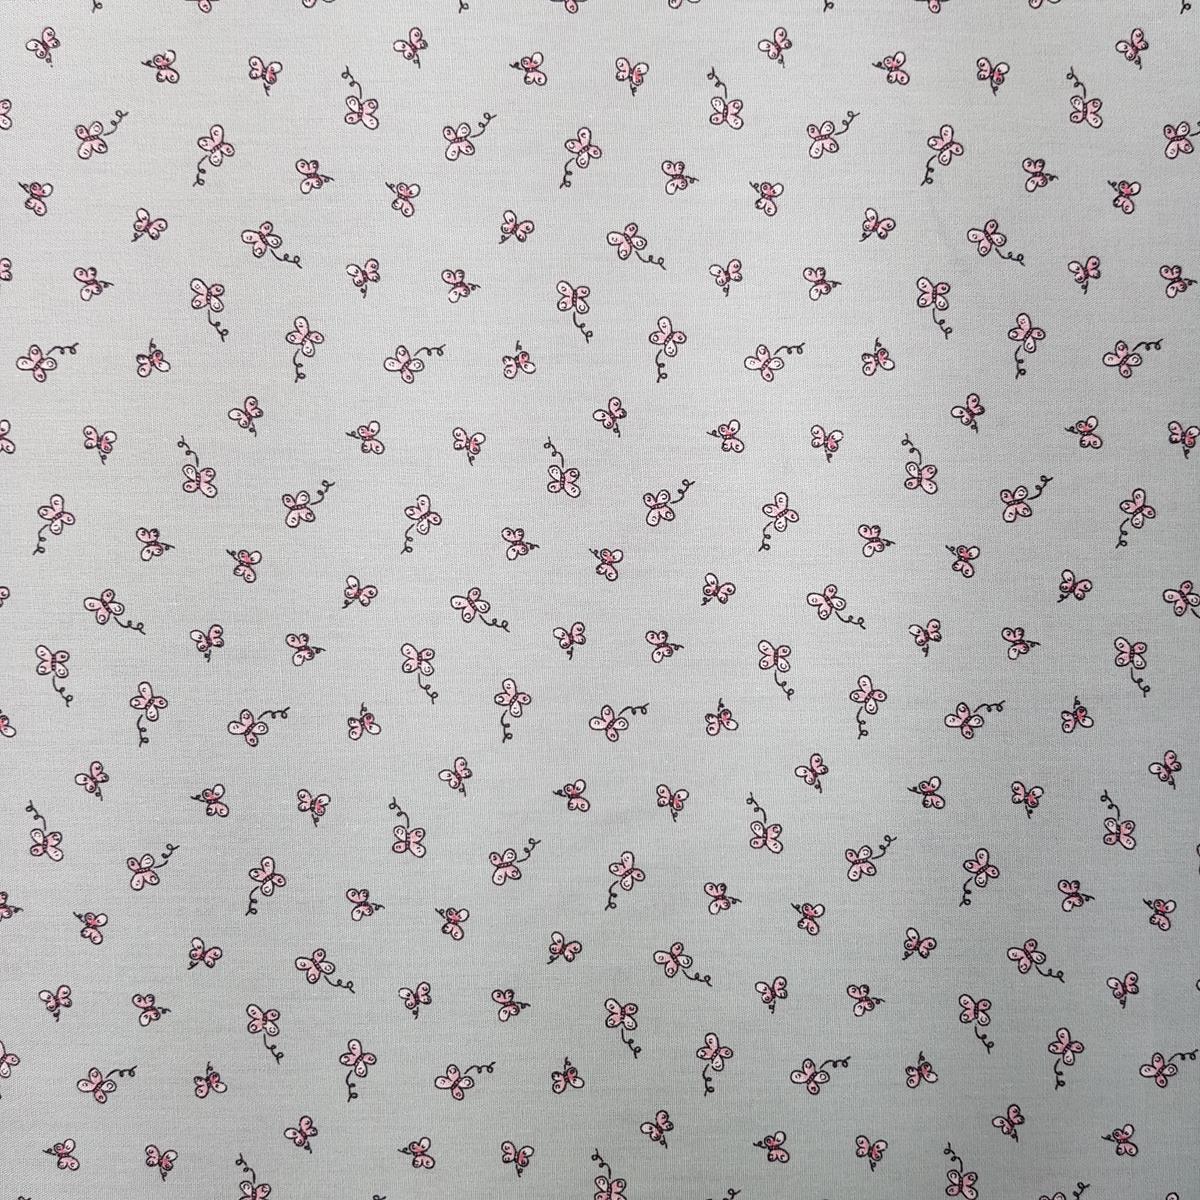 Baby Butterfly - Printed Cotton